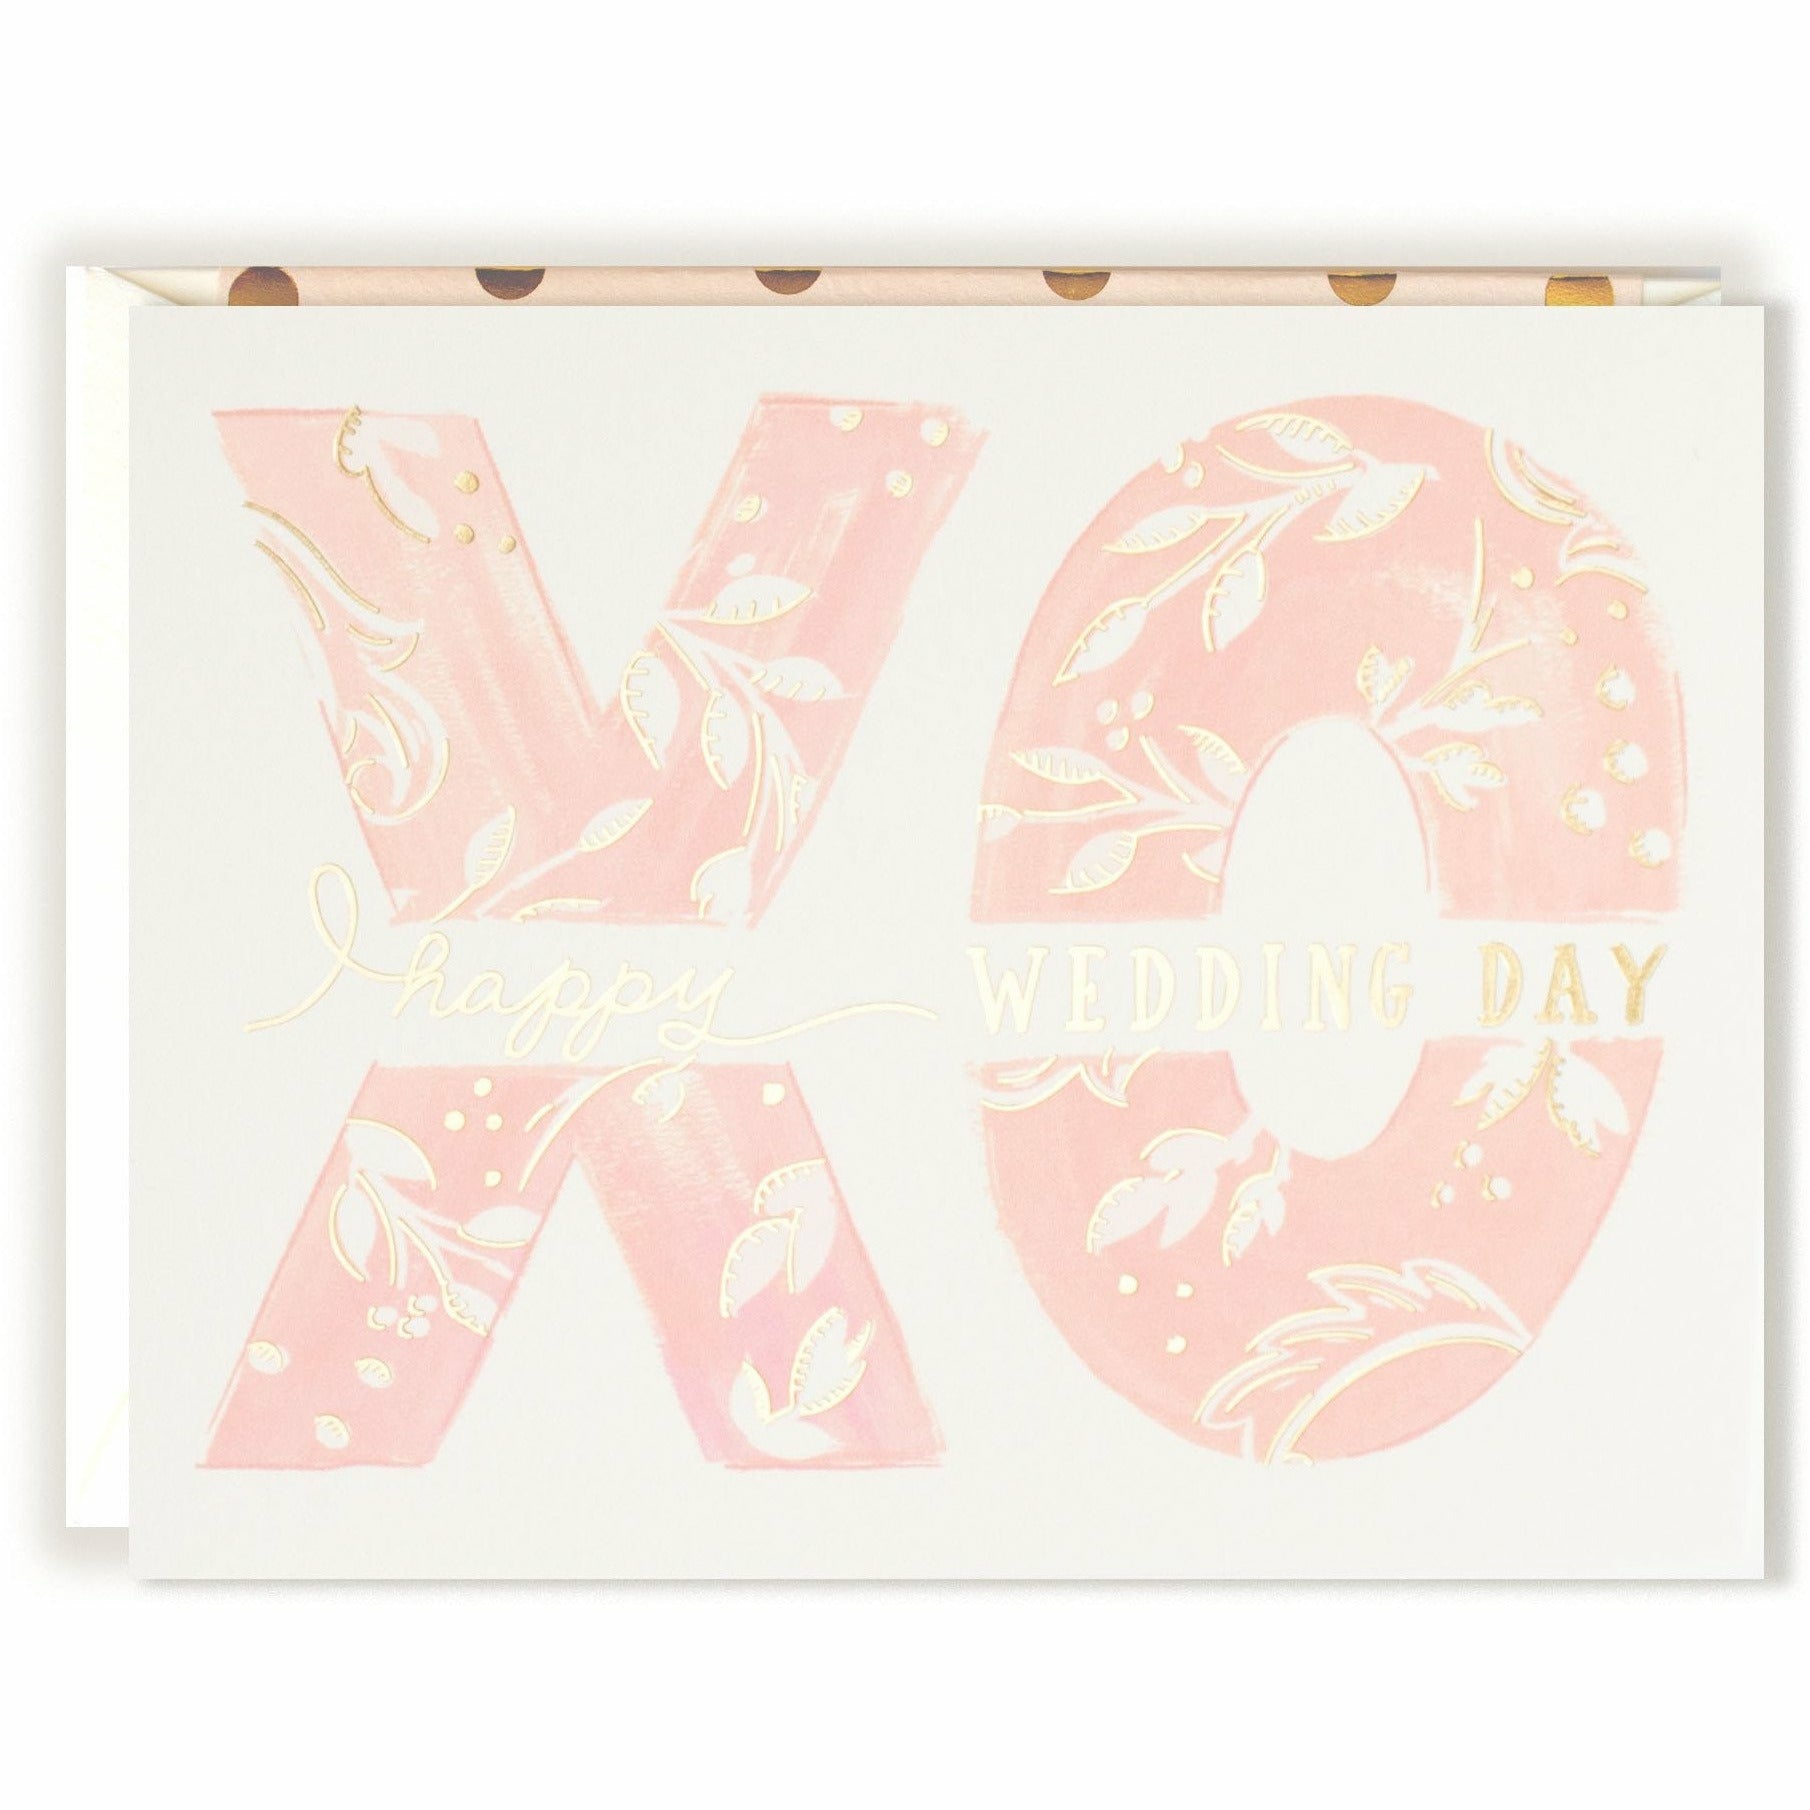 Hugs and Kisses XO Happy Wedding Pink, White, and Gold Card - The First Snow